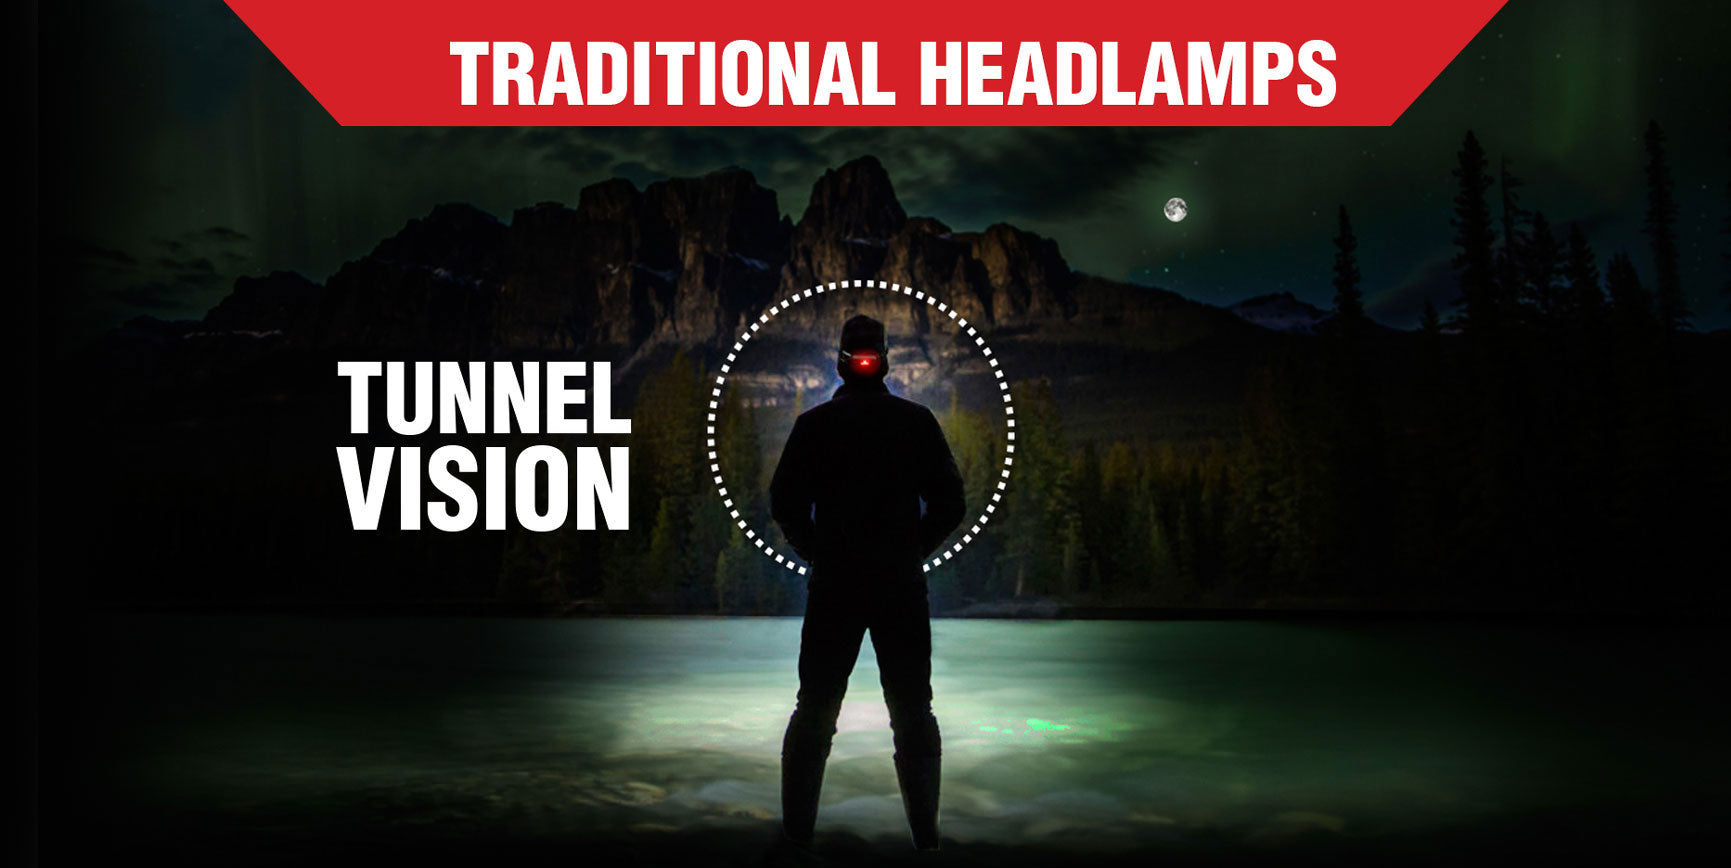 Traditional headlamp poster showing the silhouette of a person looking out over a mountainous scene with tunnel vision lighting